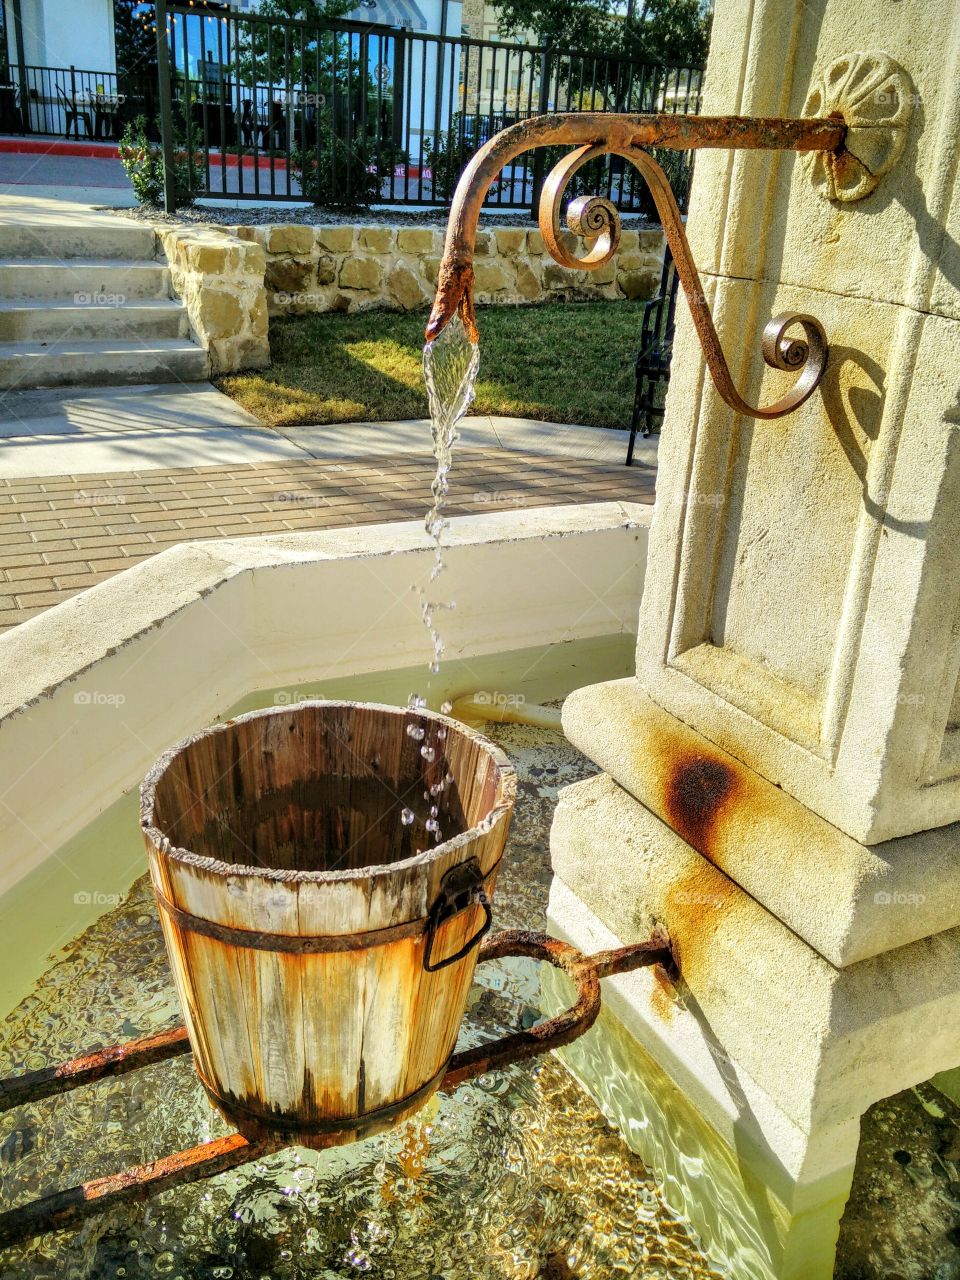 a wooden bucket catches water in a fountain